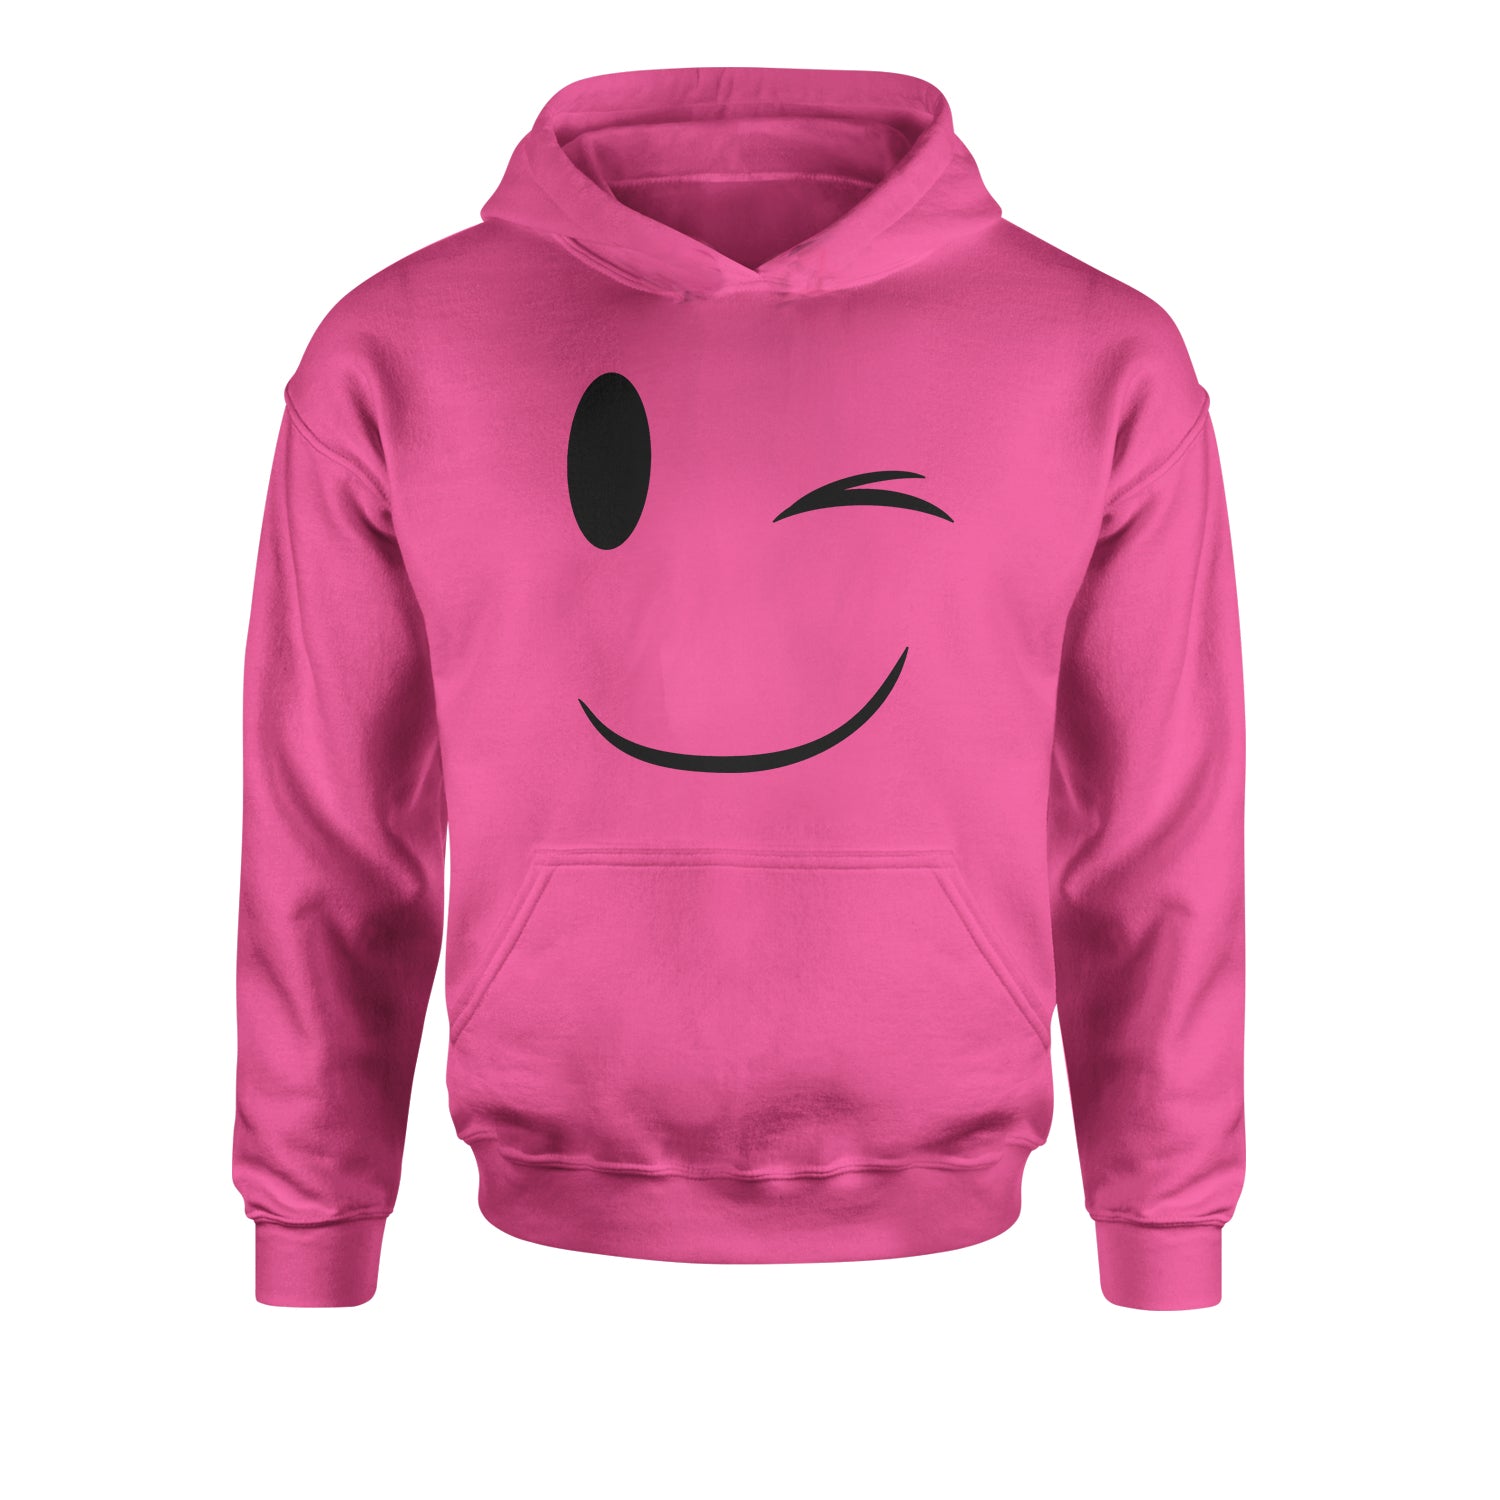 Emoticon Winking Smile Face Youth-Sized Hoodie cosplay, costume, dress, emoji, emote, face, halloween, smiley, up, yellow, youth-sized by Expression Tees